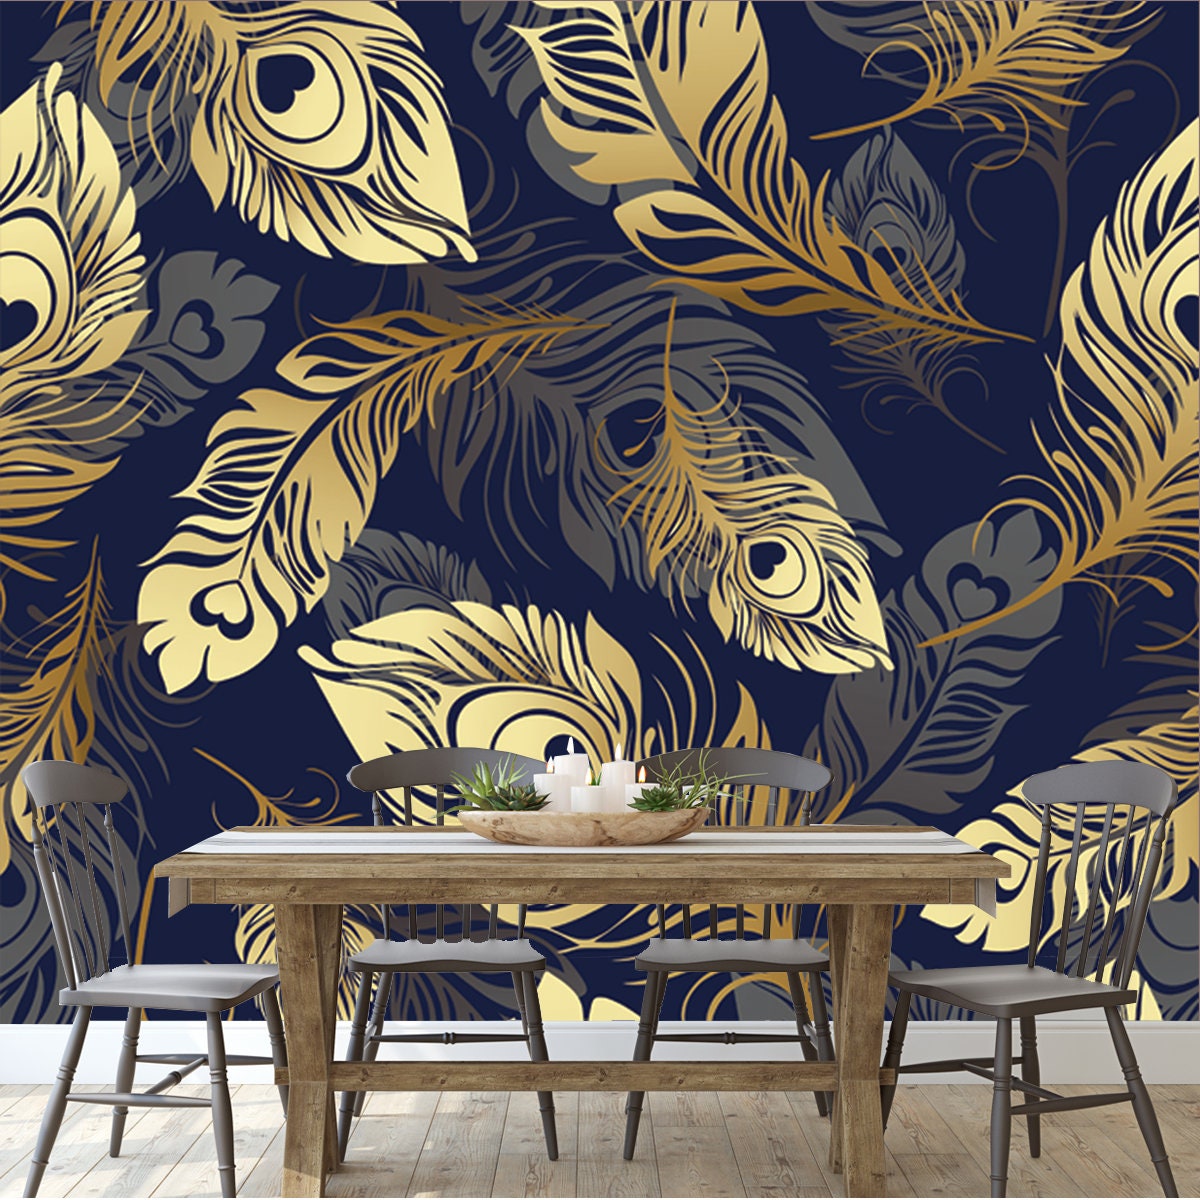 Gold Feathers Seamless Pattern. Rich, Luxury Design Wallpaper Dining Room Mural